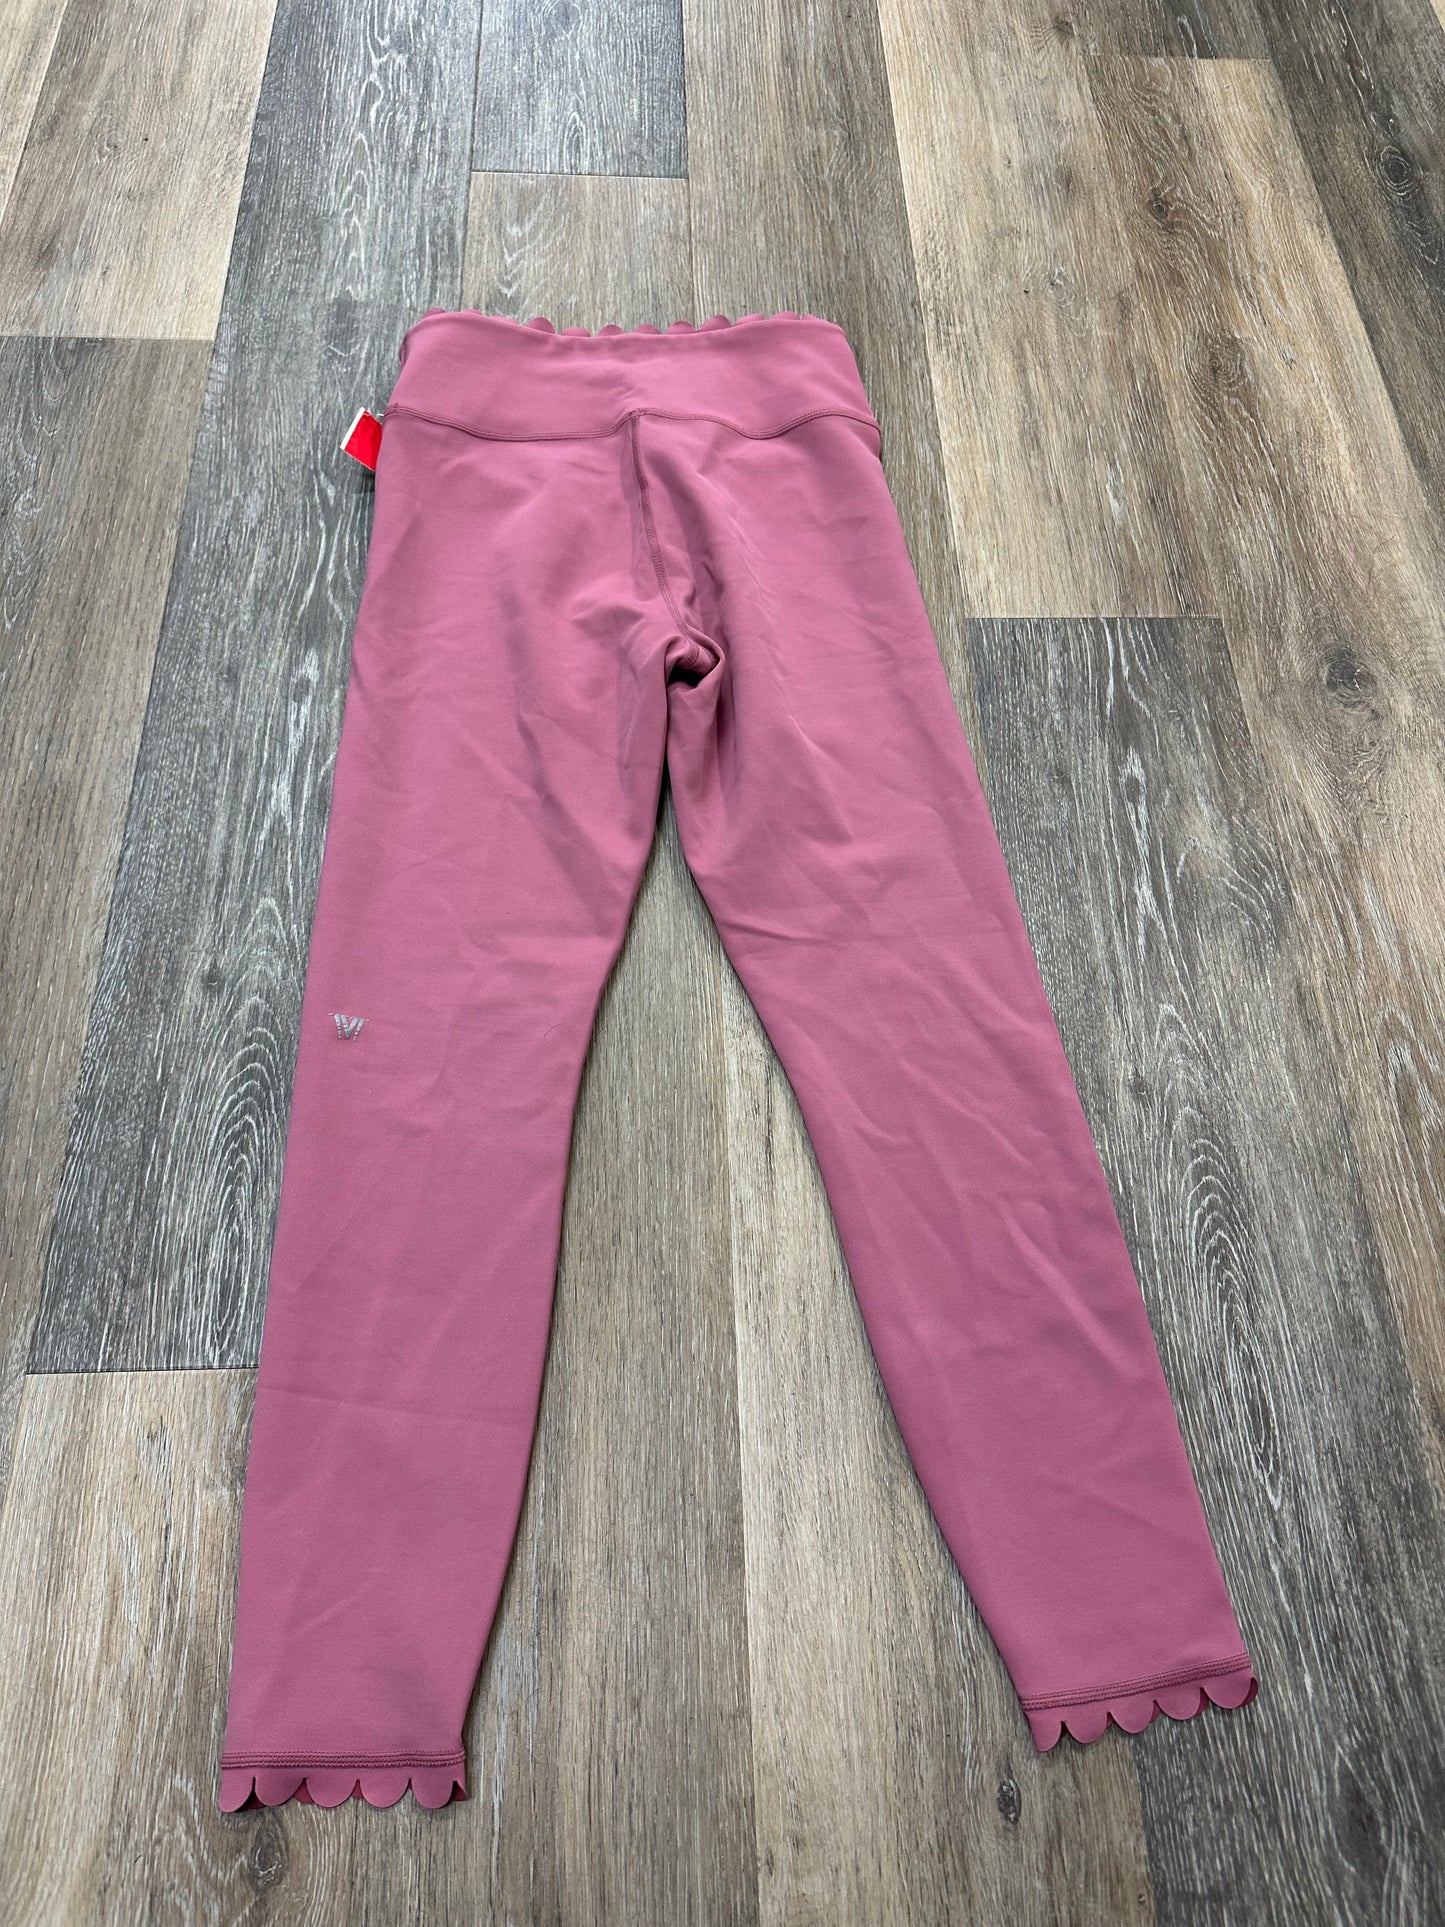 Pink Athletic Capris Ivl Collective , Size 4